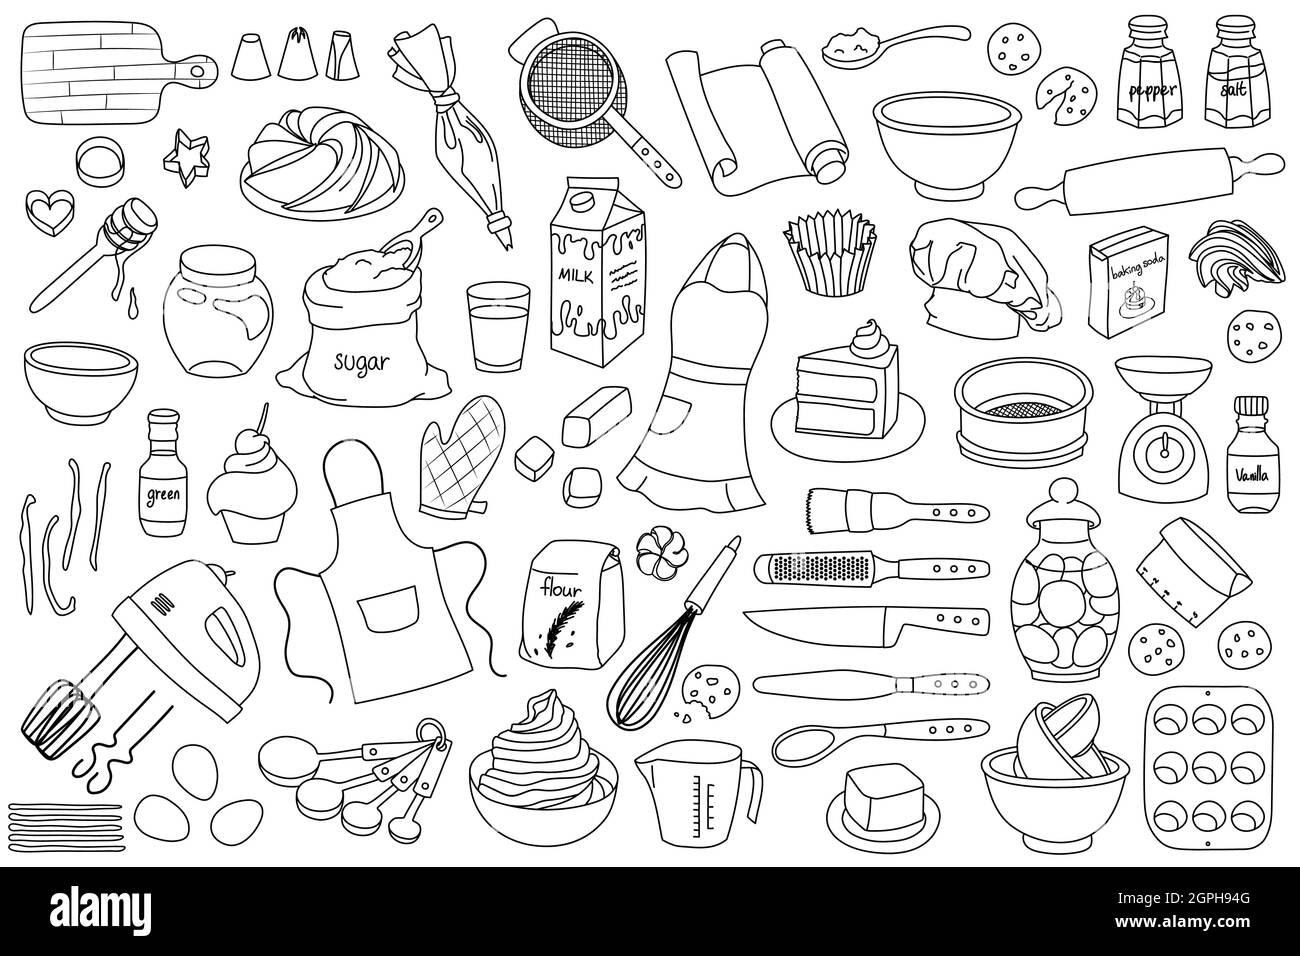 Collection of simple hand drawn vector illustrated doodles of baking tools, ingredients and elements. Black outlines on a white background. Stock Vector